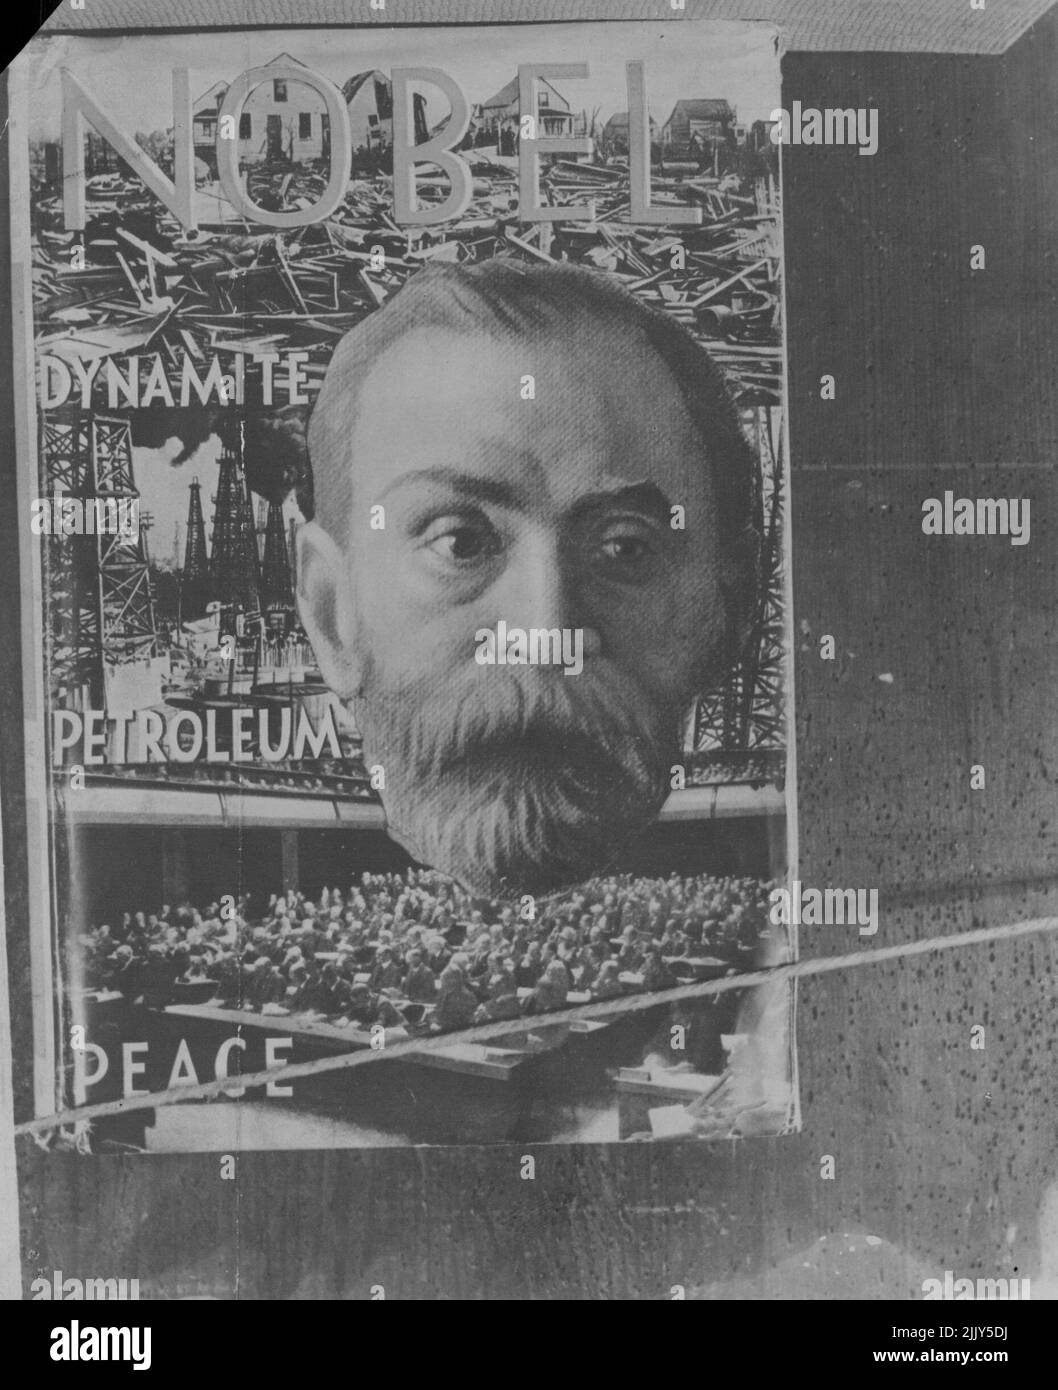 Dynamite king Alfred Nobel was really a very shy man who hated noise. Top right, Nobel as he really looked. February 1, 1930. Stock Photo